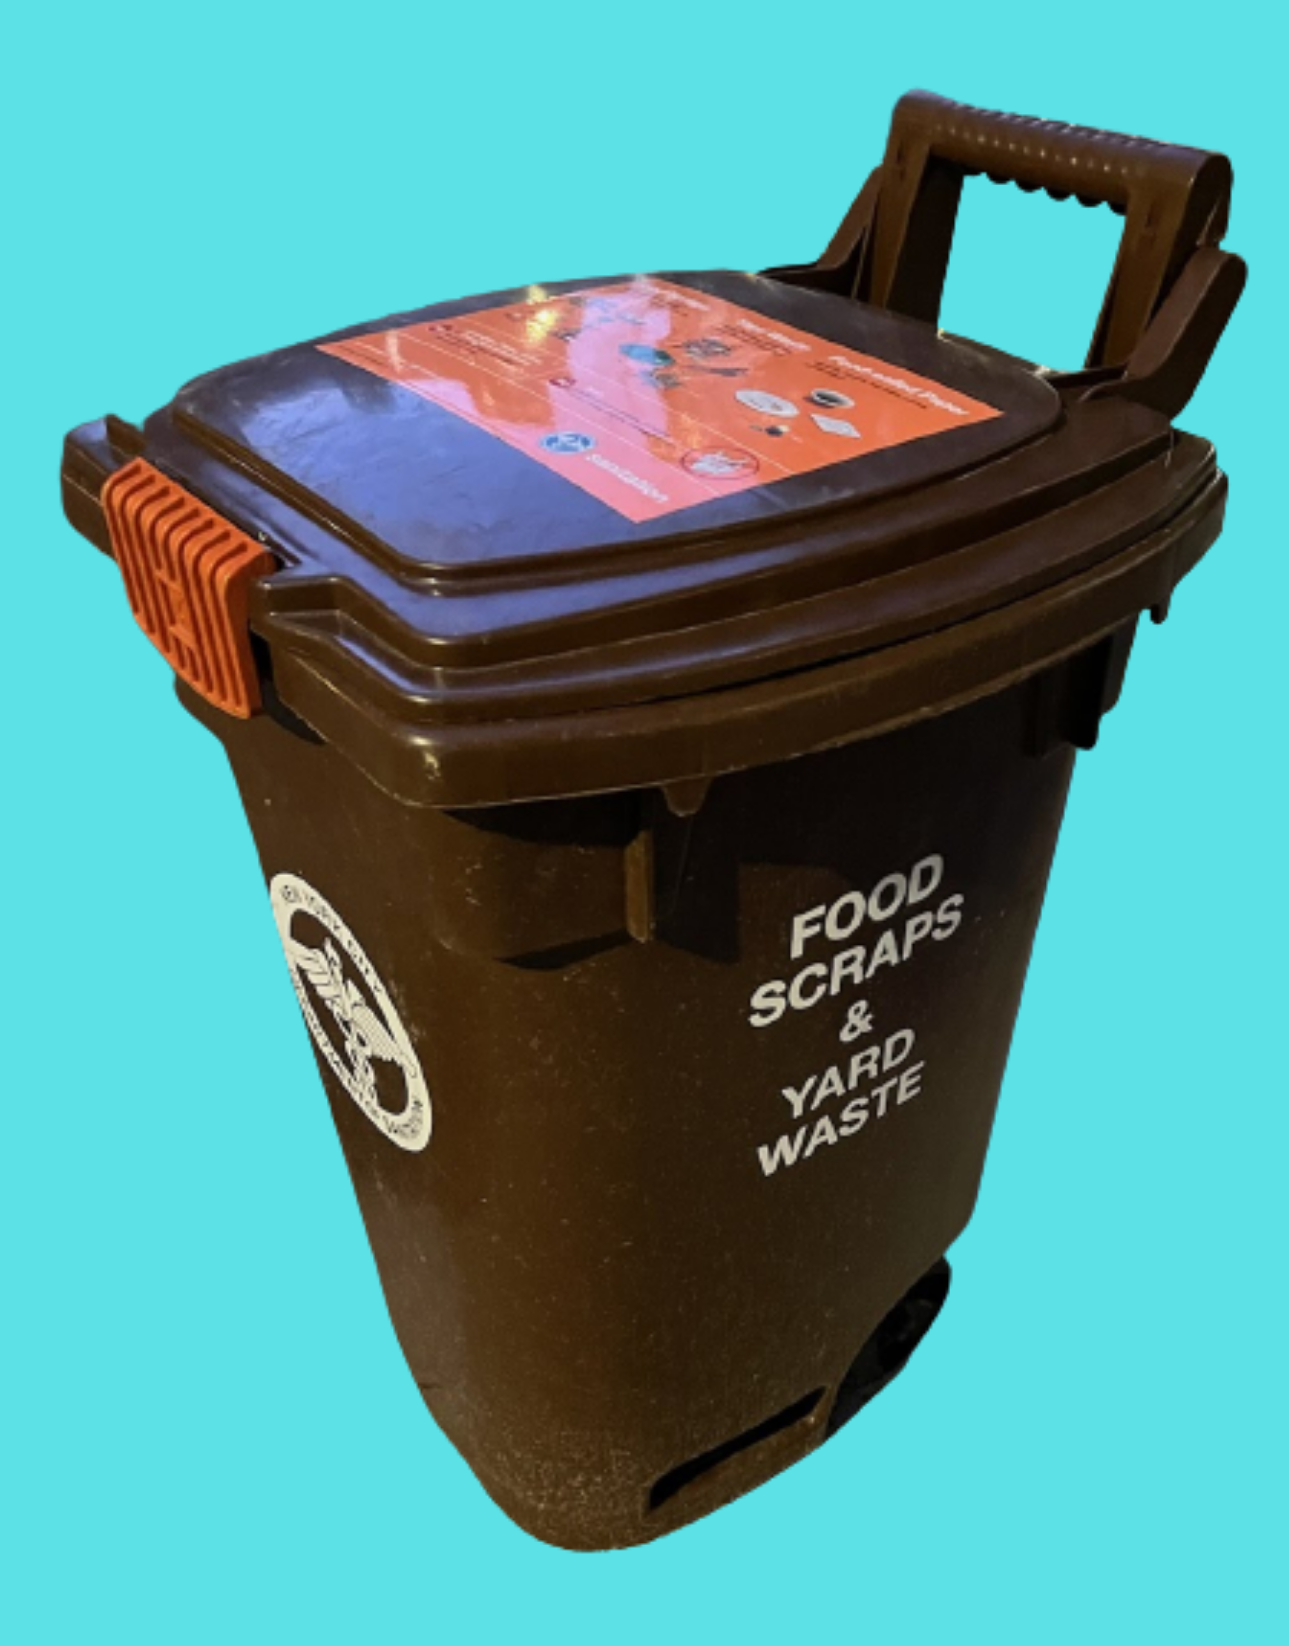 Learn more about Curbside Composting